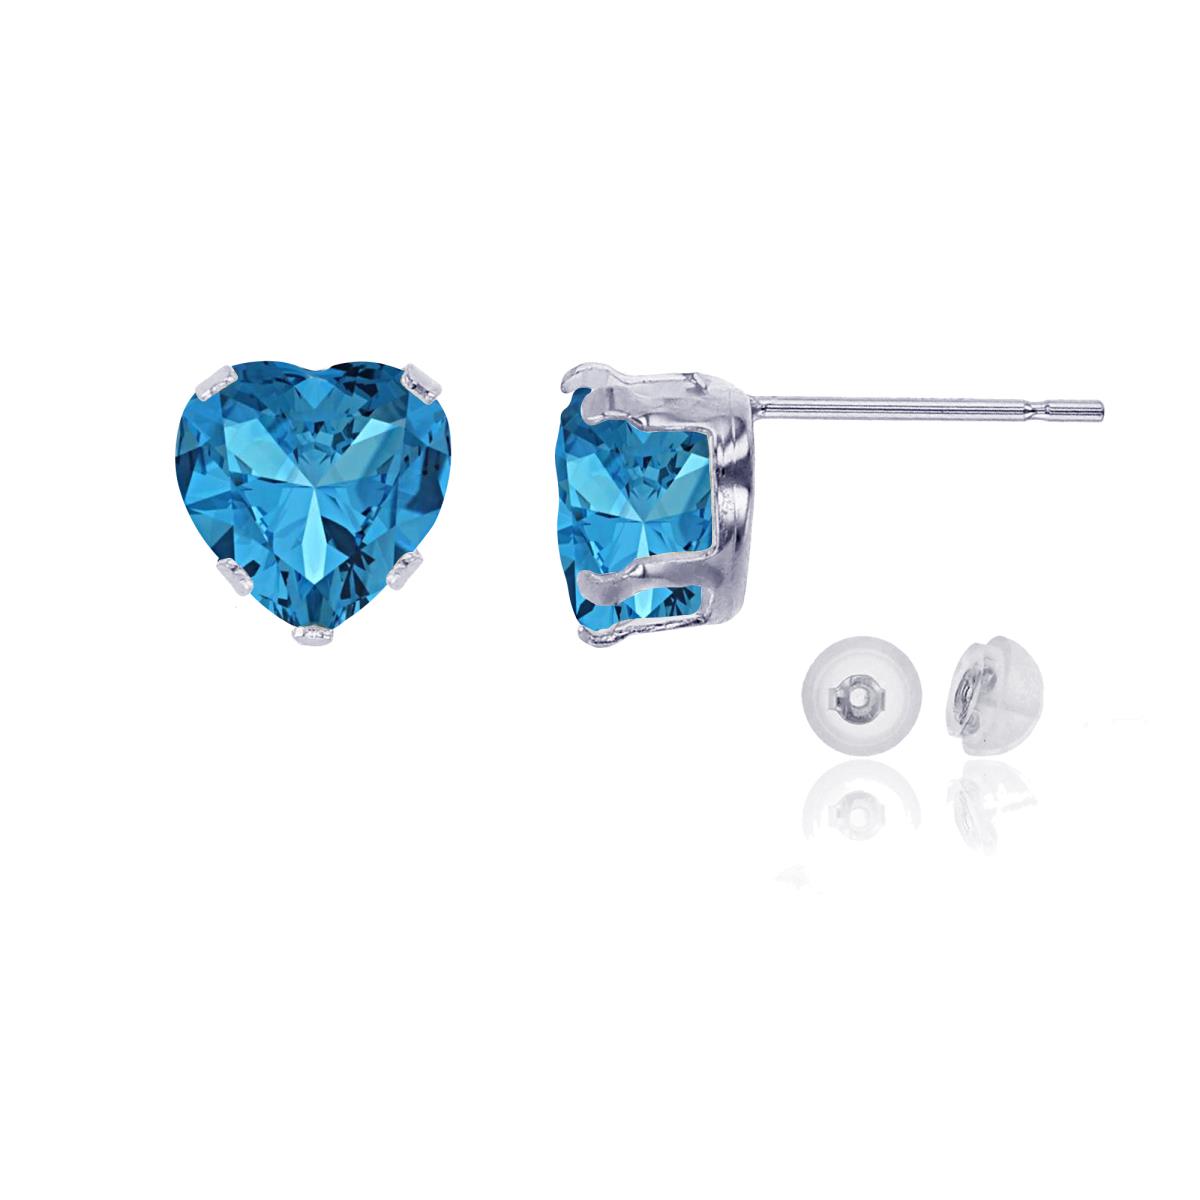 10K White Gold 6x6mm Heart Swiss Blue Topaz Stud Earring with Silicone Back